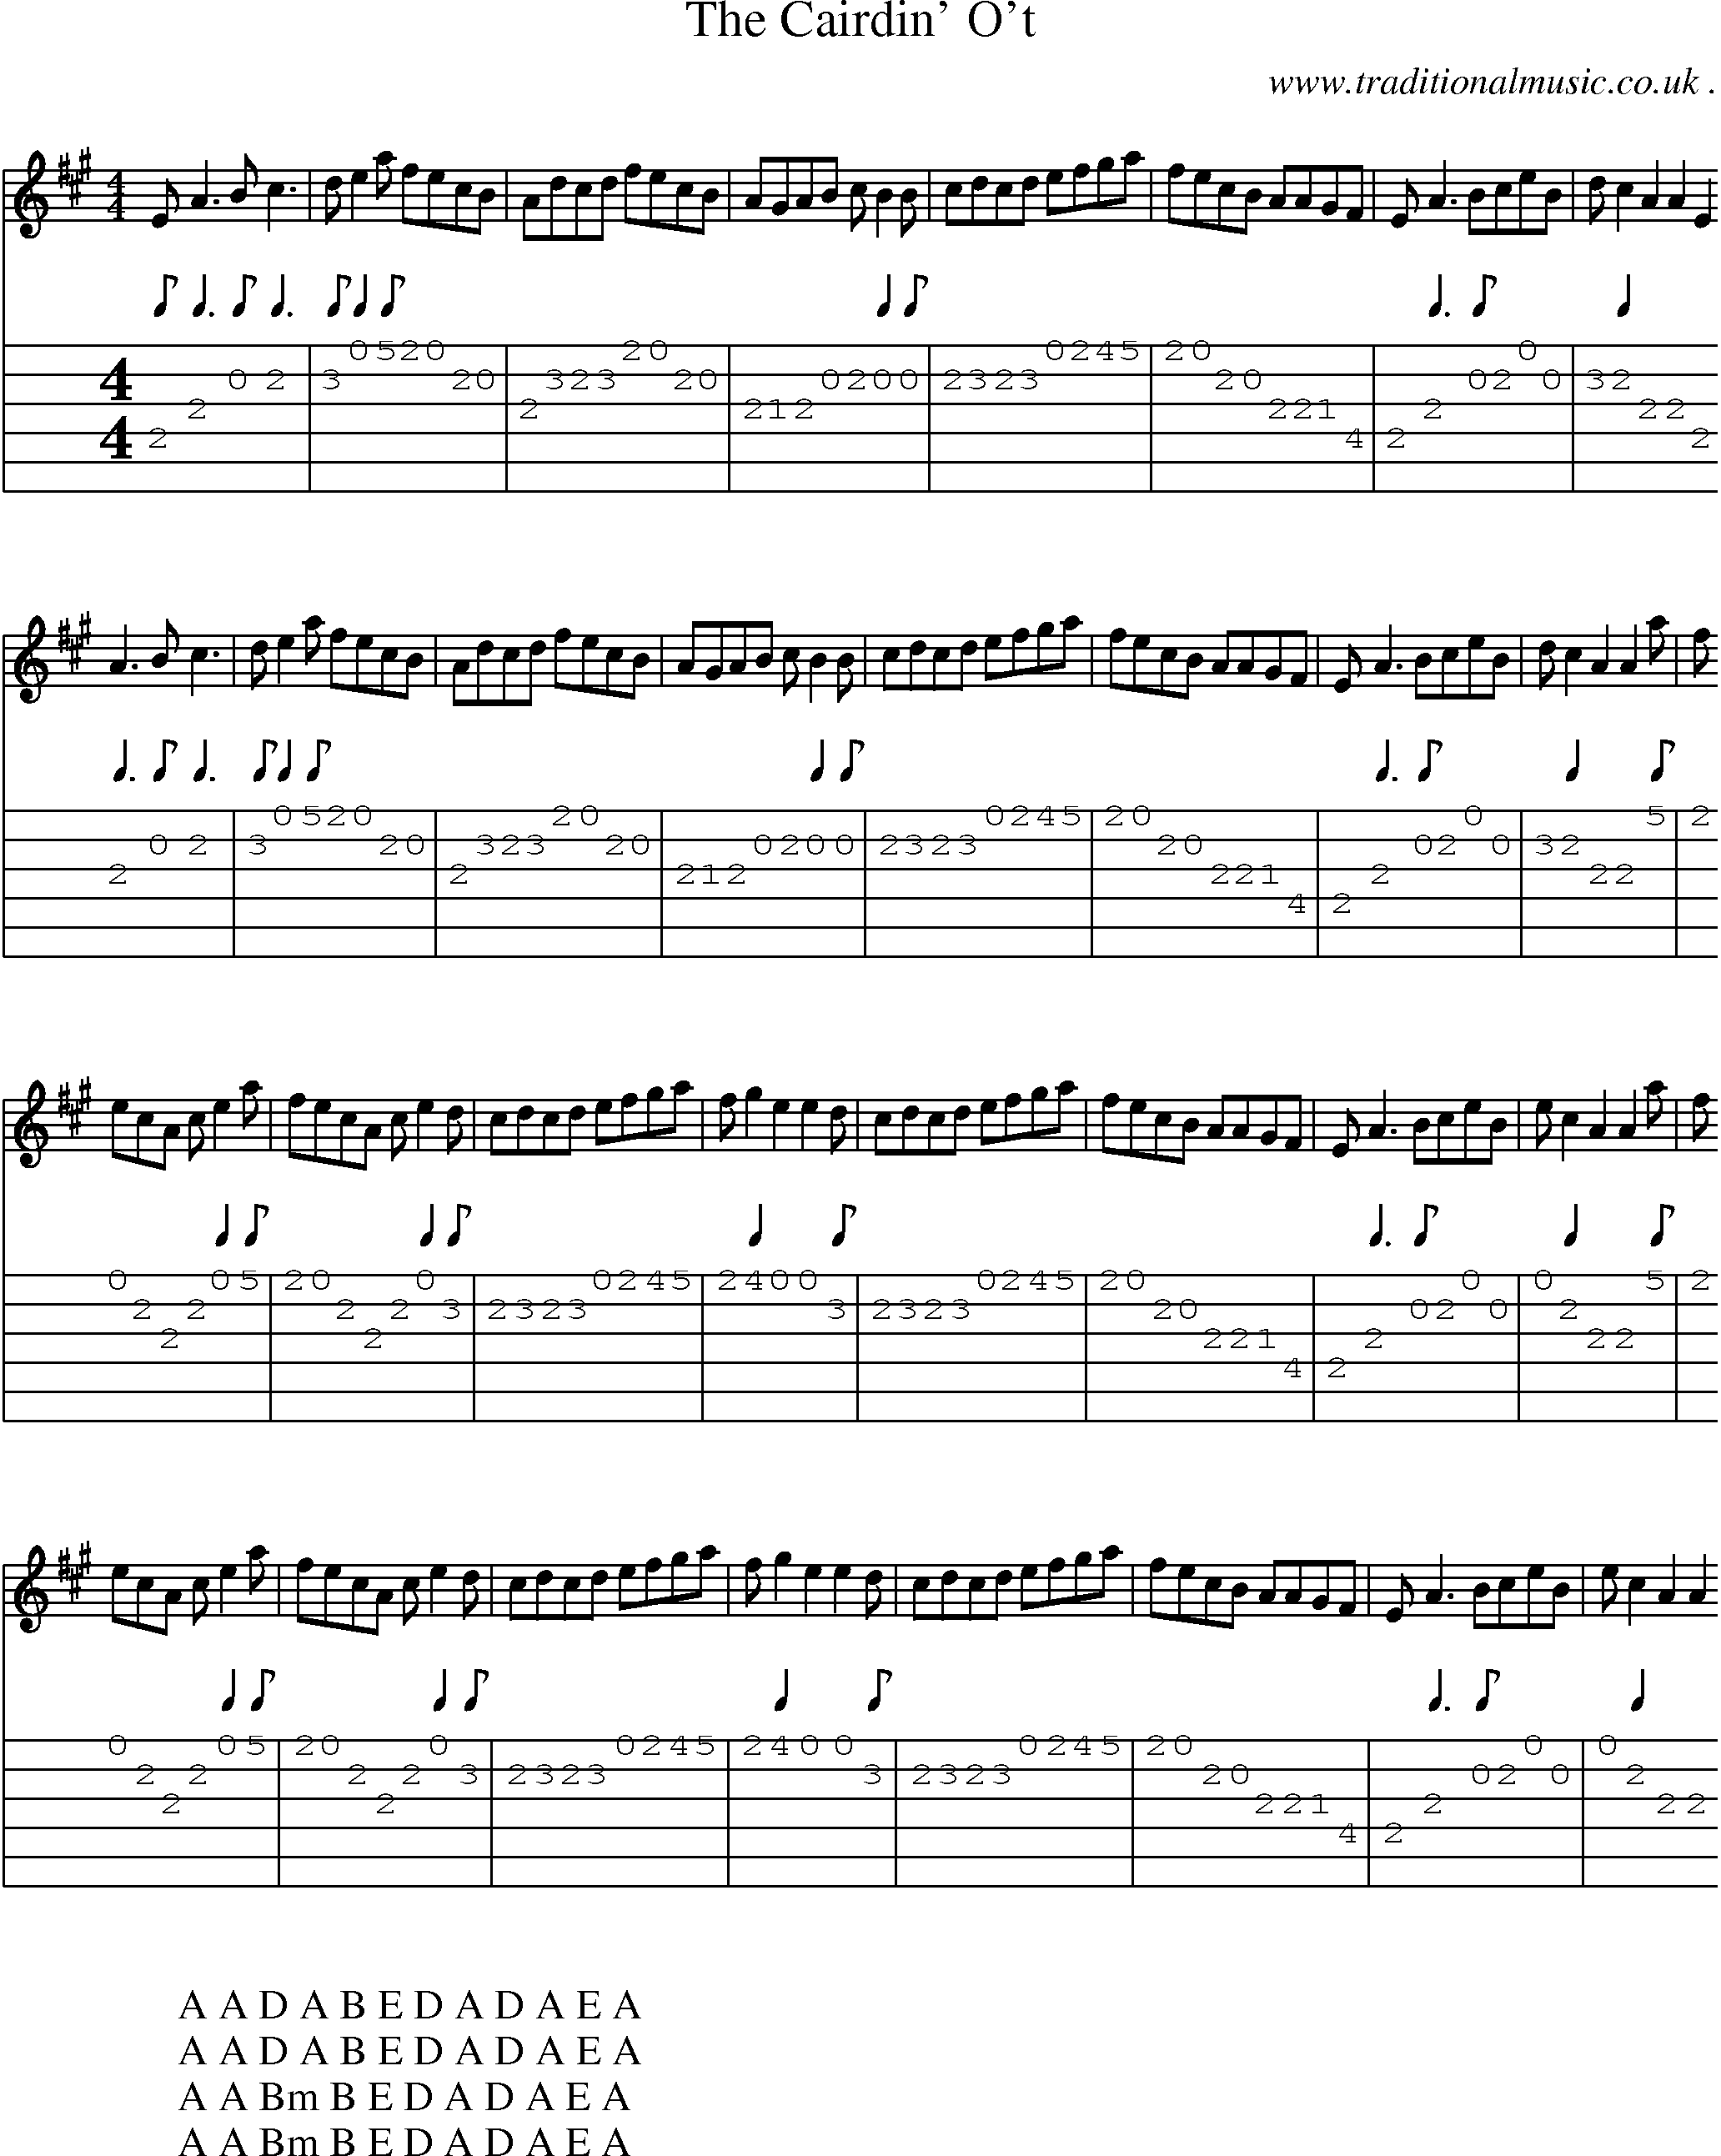 Sheet-Music and Guitar Tabs for The Cairdin Ot